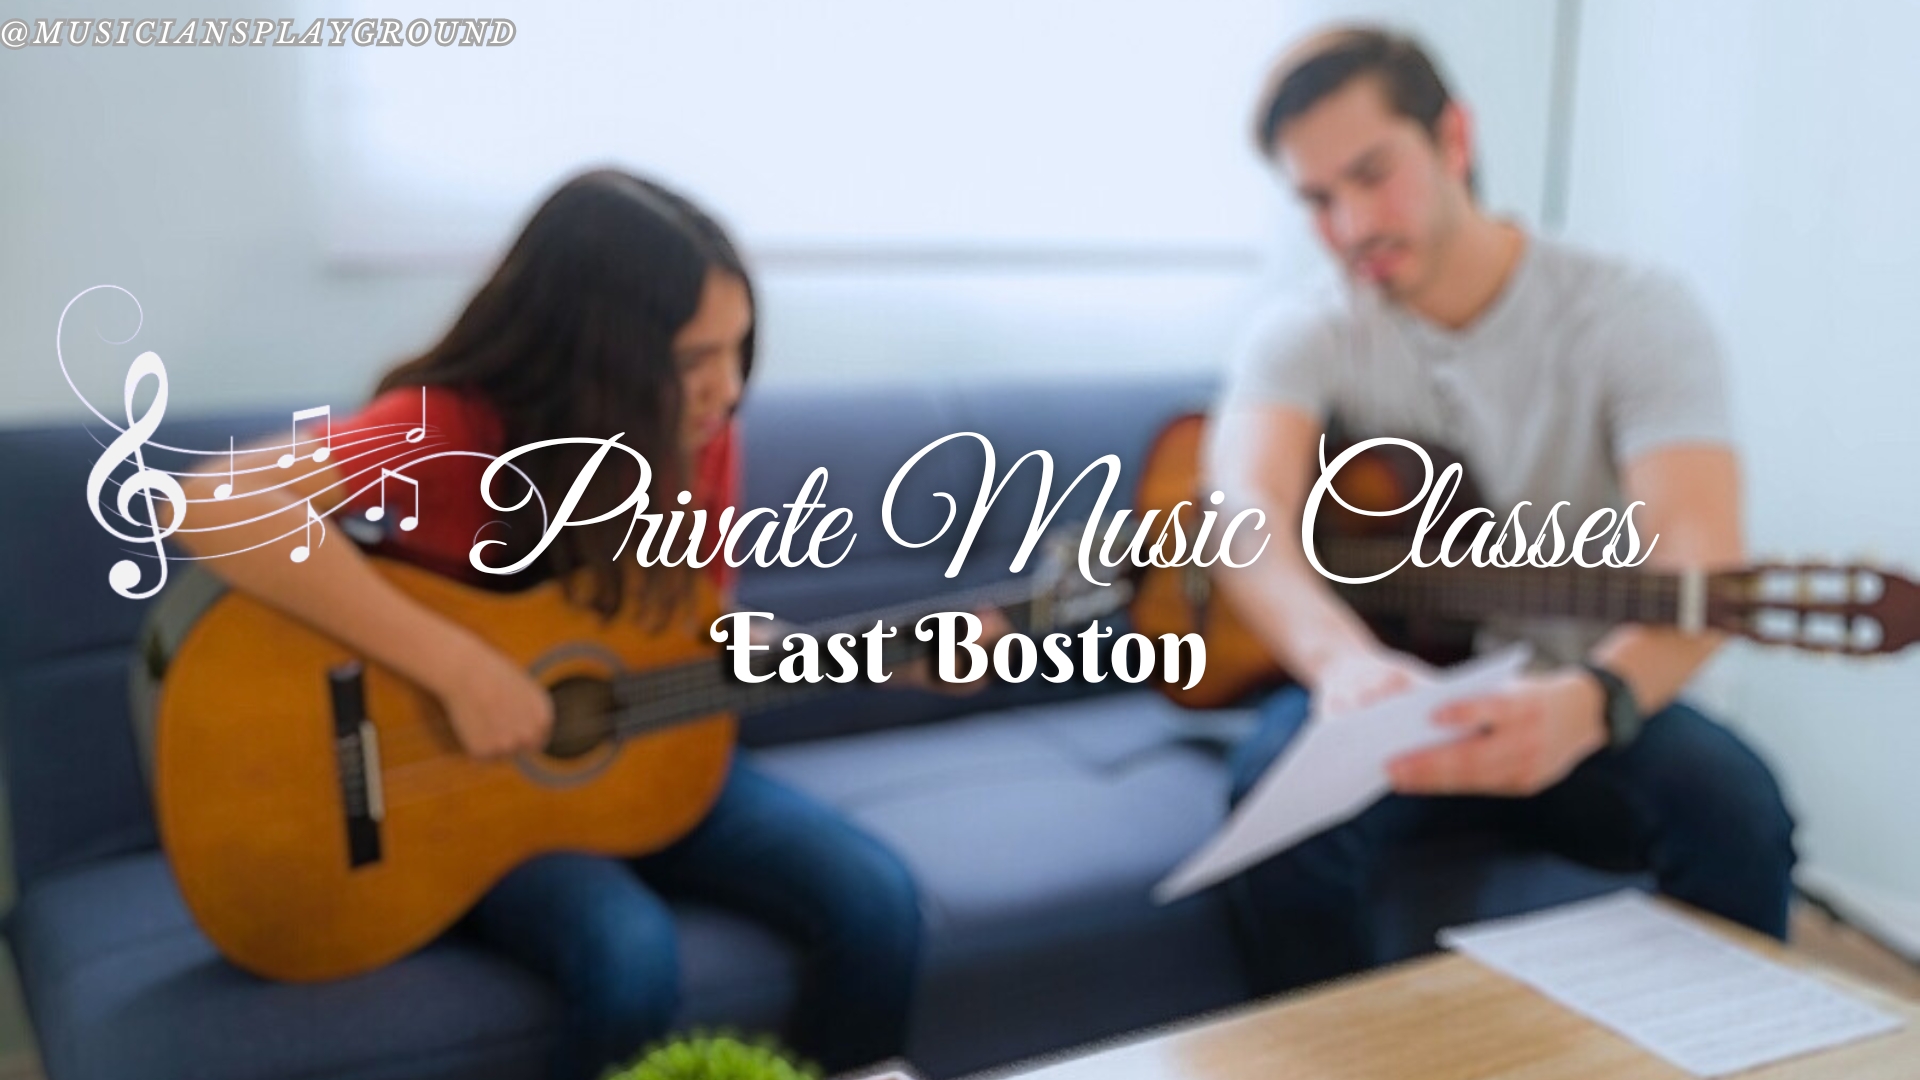 Welcome to East Boston: The Perfect Place for Private Music Lessons